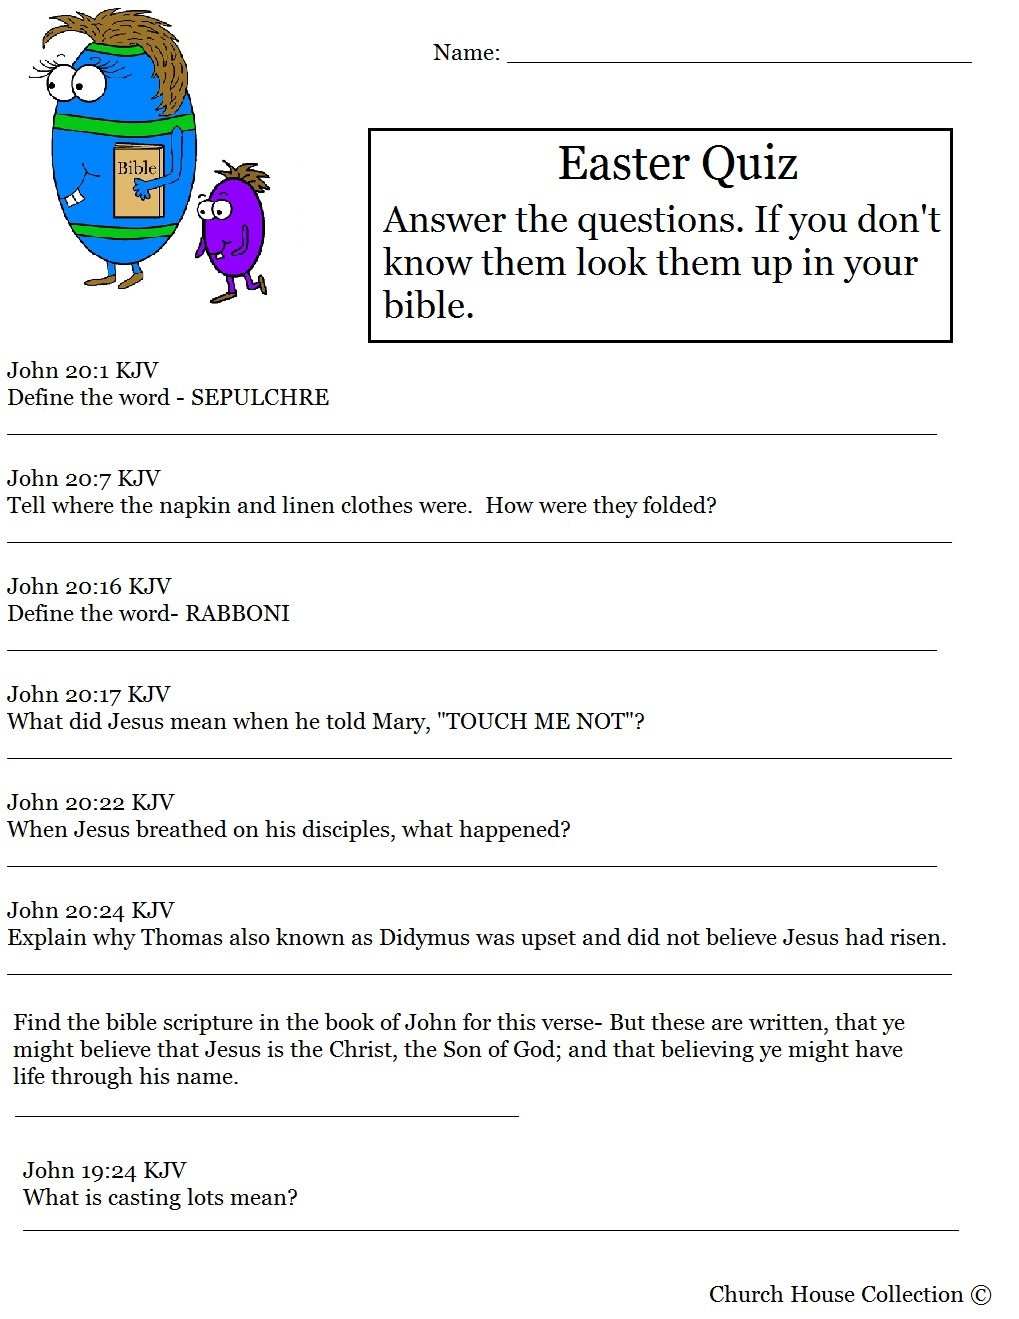 Hard Easter Quiz On Resurrection Of Jesus - Free Bible Questions And Answers Printable